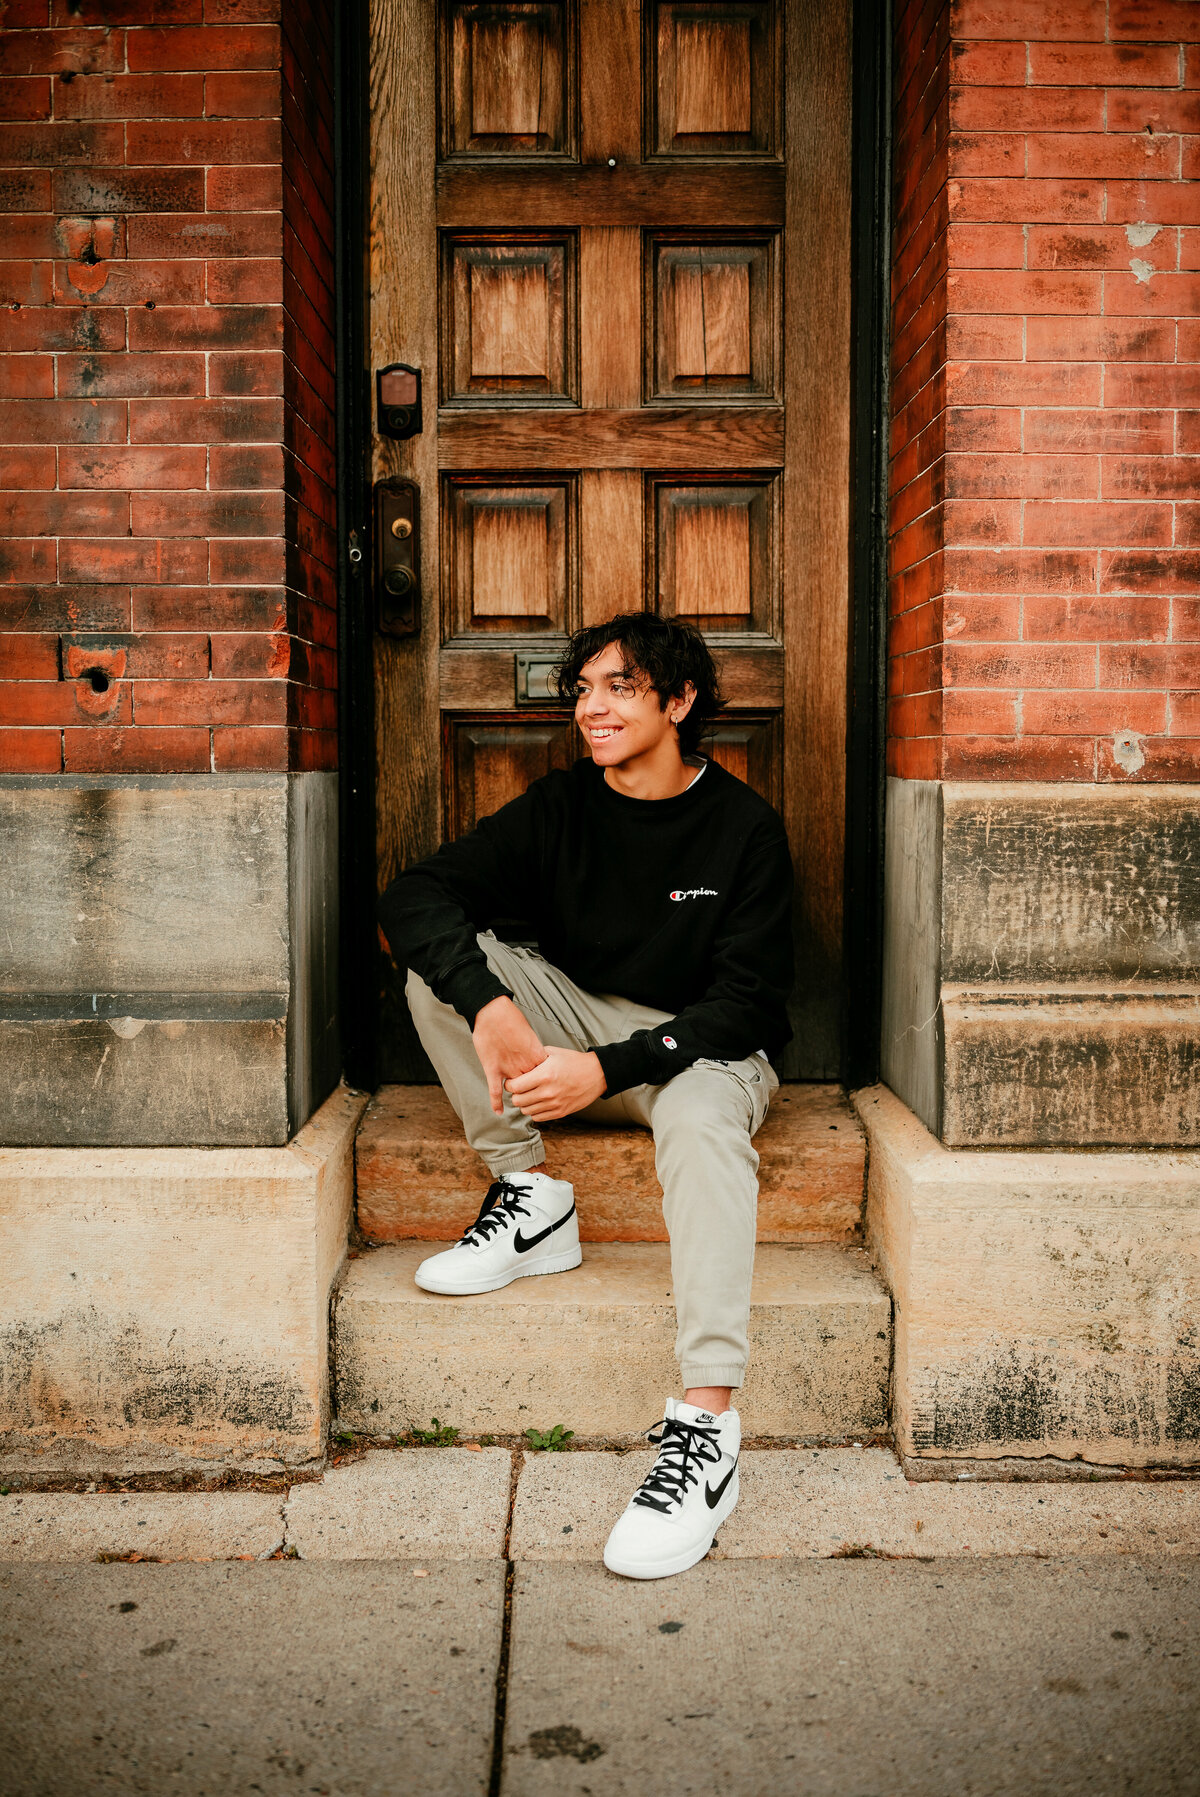 In picturesque downtown Stillwater, Minnesota, this senior portrait captures the essence of a Stillwater High School senior. Seated on a charming staircase with a textured wooden door as a backdrop, he gazes thoughtfully off to the side, creating a timeless image that embodies the unique character of the city and the spirit of a young graduate.